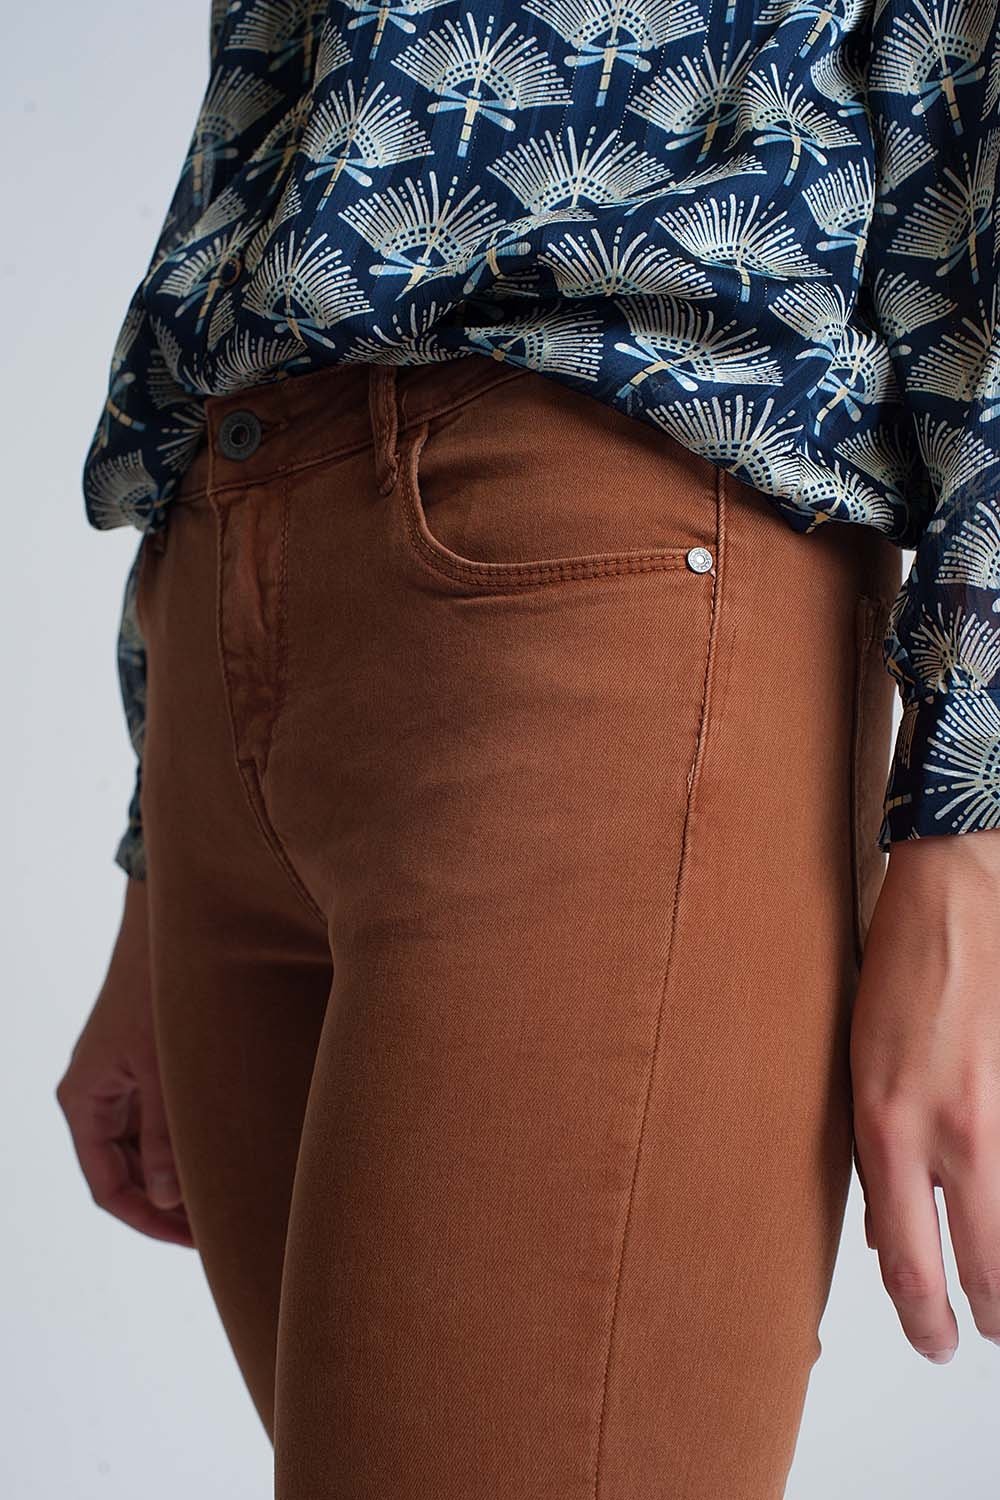 High Waisted Super Skinny Pants in Camel